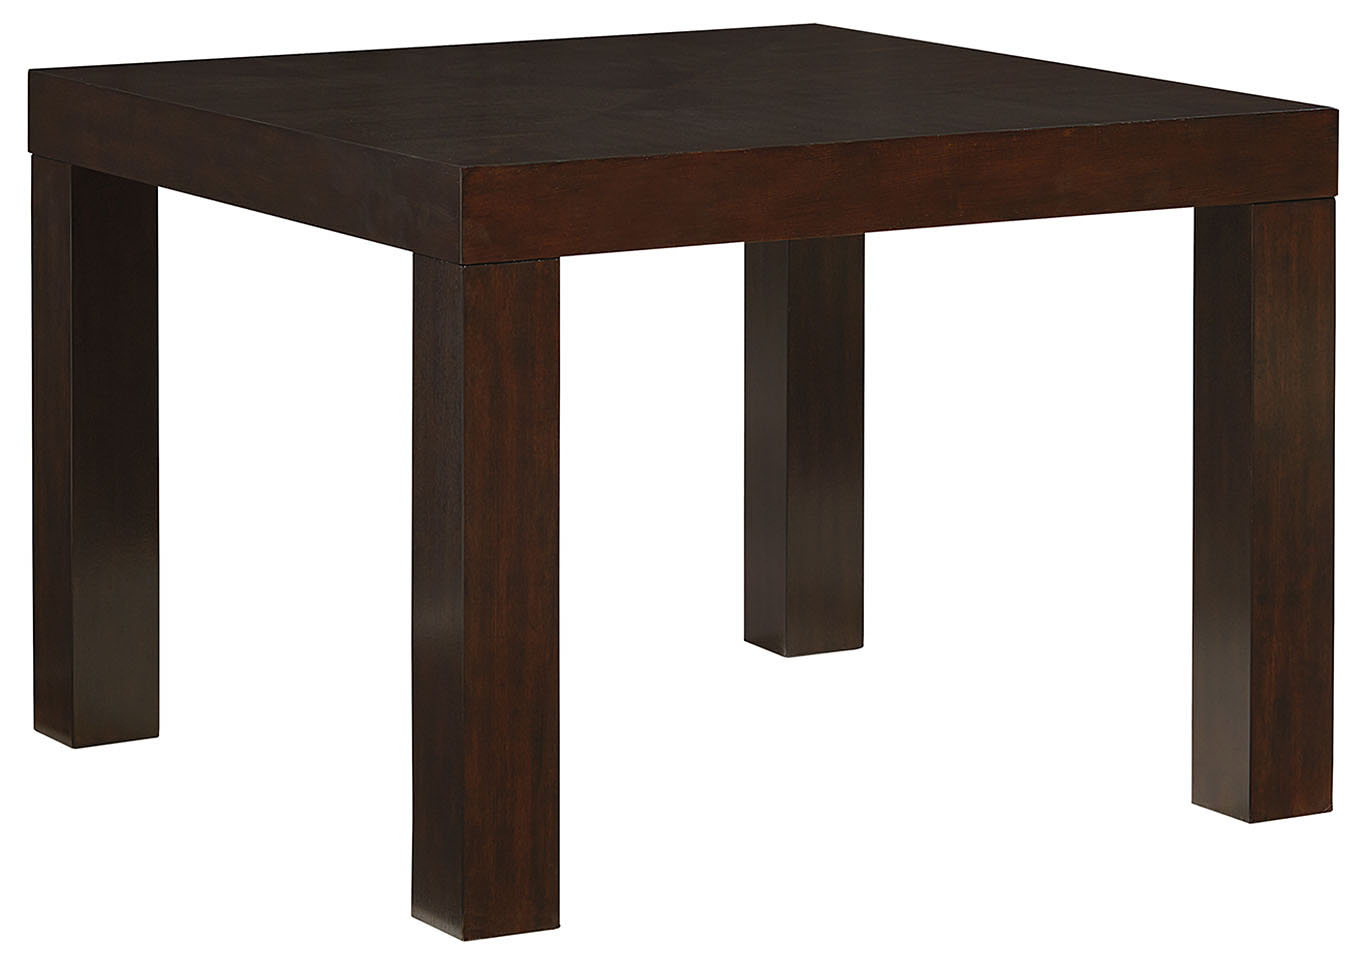 Couture Elegance Brown Square Dining Table,Standard